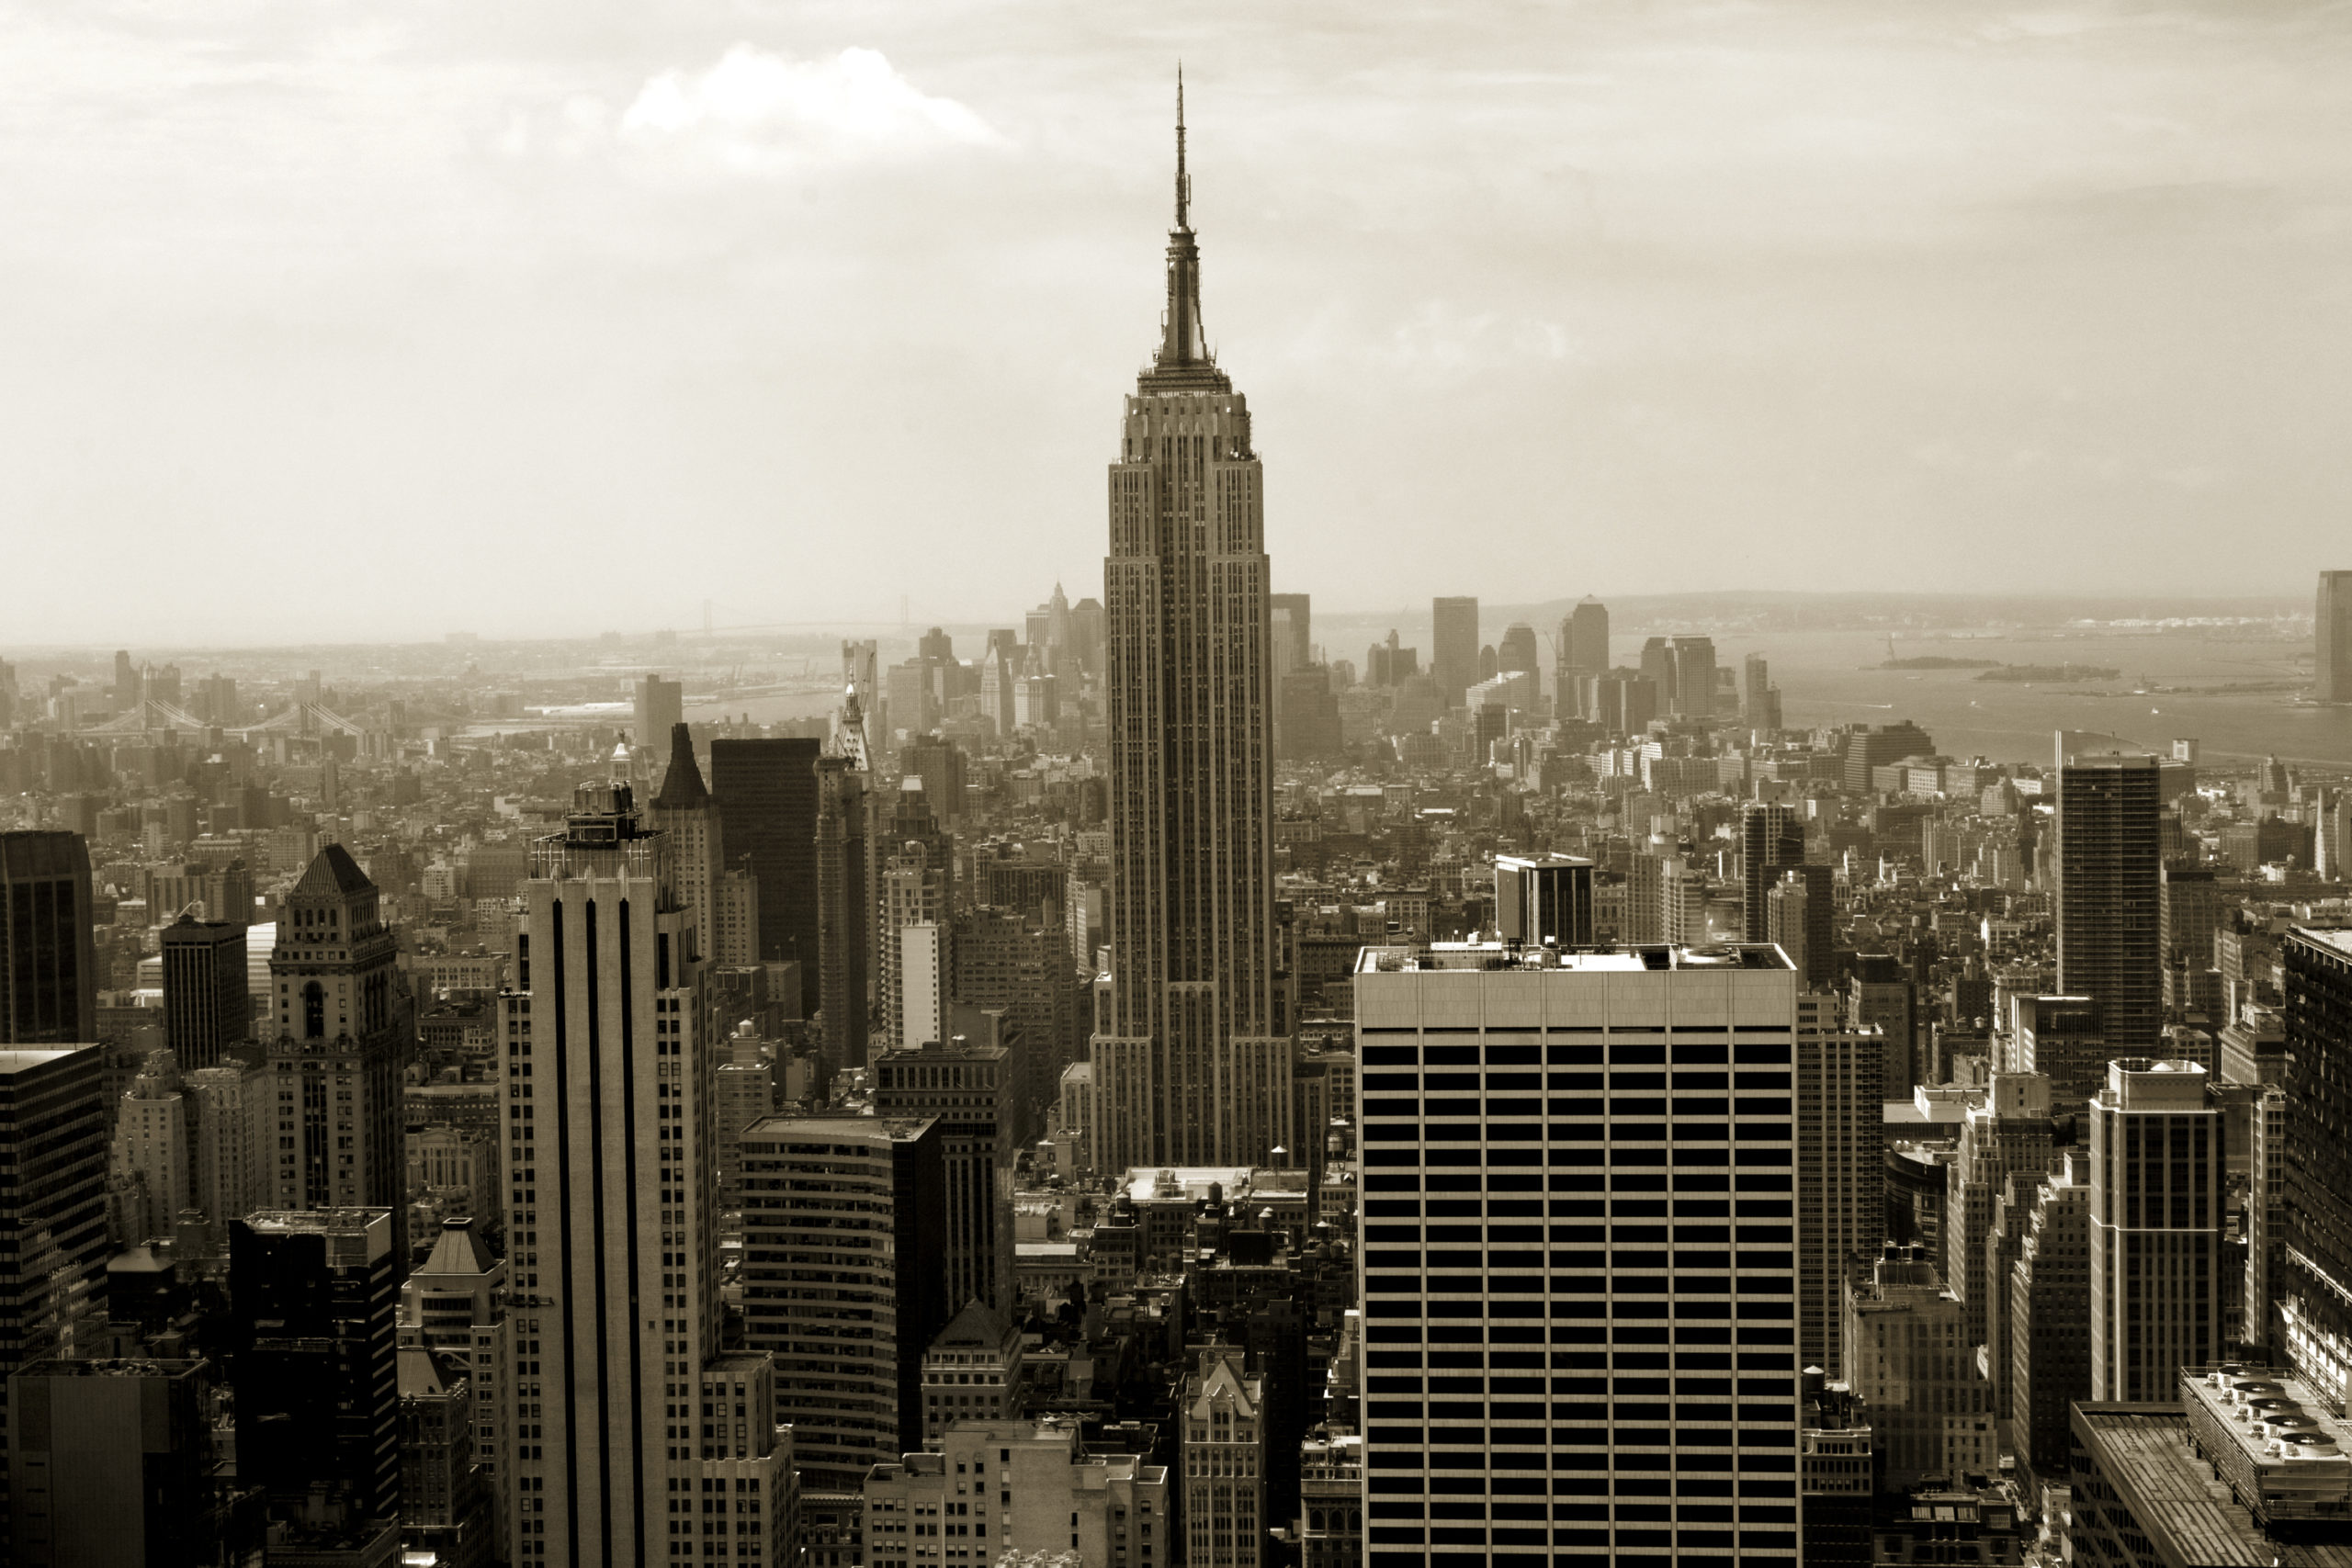 A shot of the Empire State building and the New York Skyline in sepia.